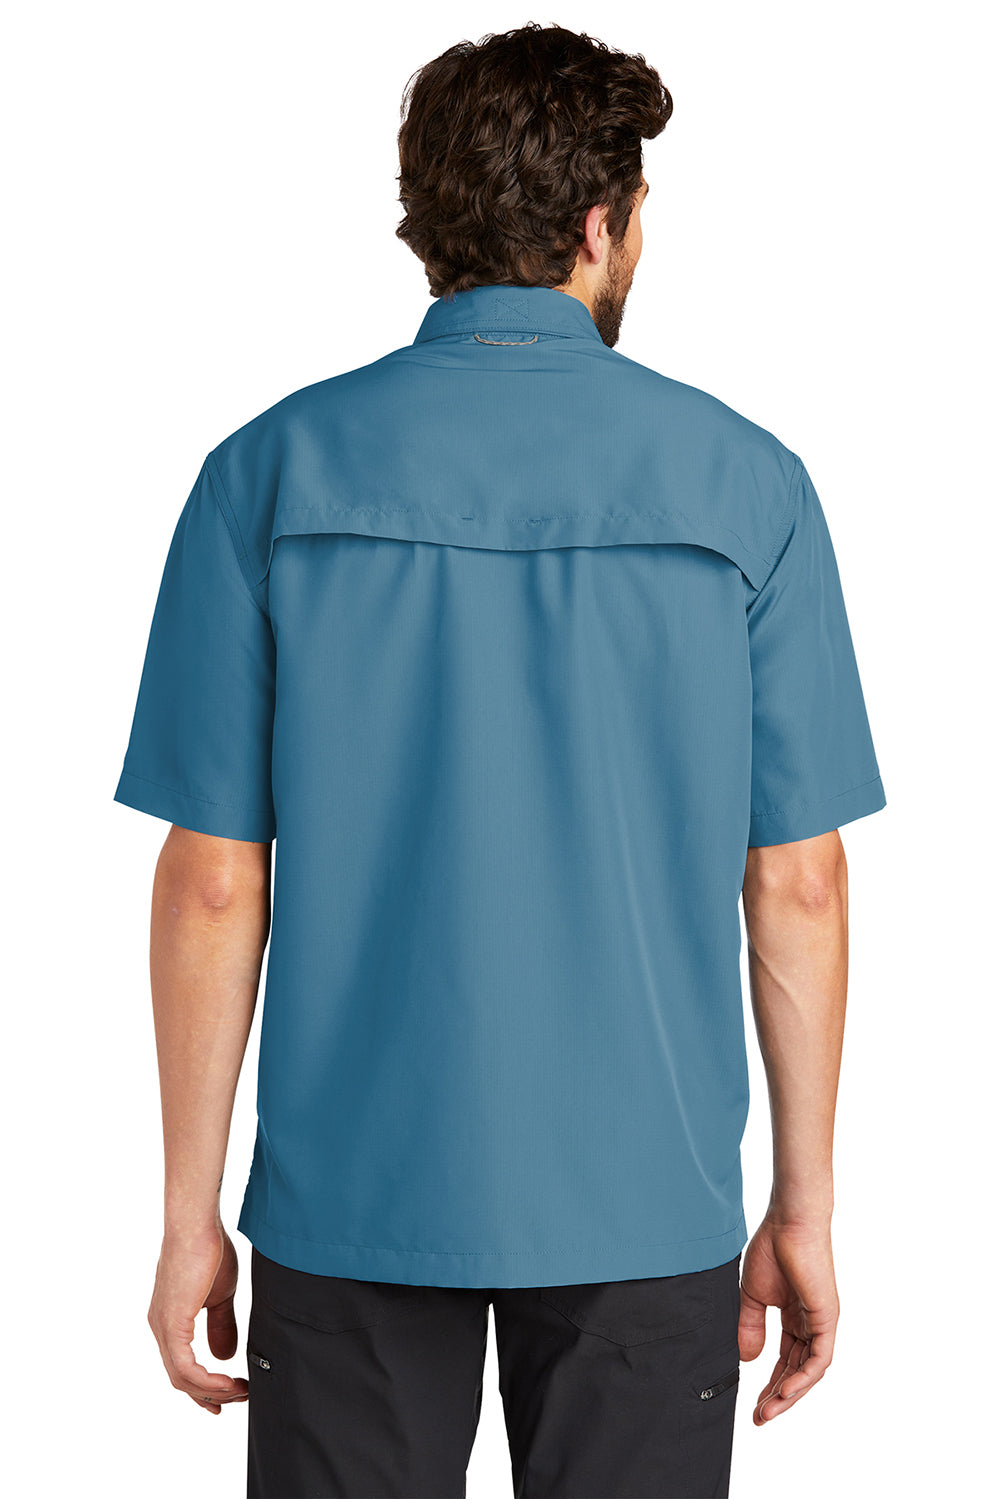 Eddie Bauer EB602 Mens Performance Fishing Moisture Wicking Short Sleeve Button Down Shirt w/ Double Pockets Gulf Teal Blue Model Back